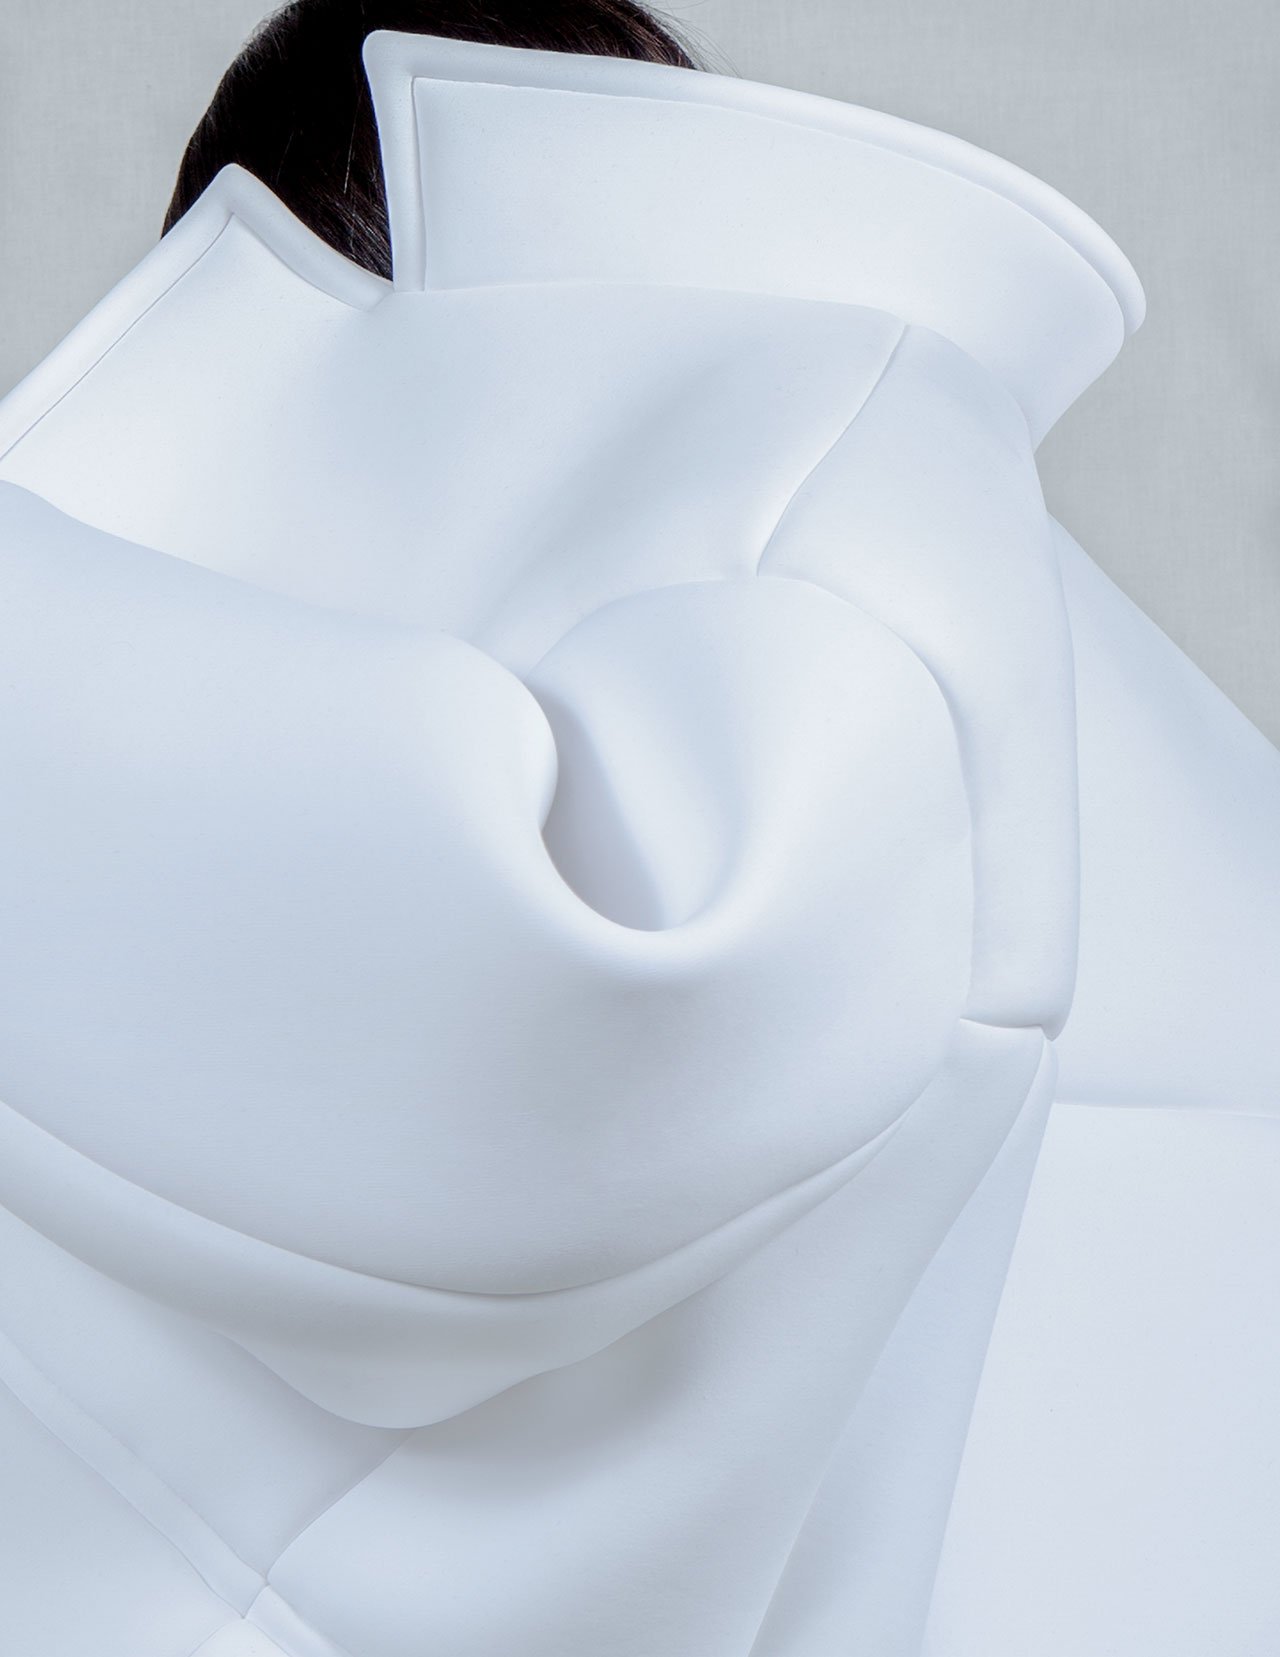 Melitta Baumeister, Jacket (detail), from Fall / Winter 2014 Ready-to-Wear collection, 2014, Neoprene. Featured in book, alternate object will appear in exhibition © Paul Jung / thelicensingproject.com. 